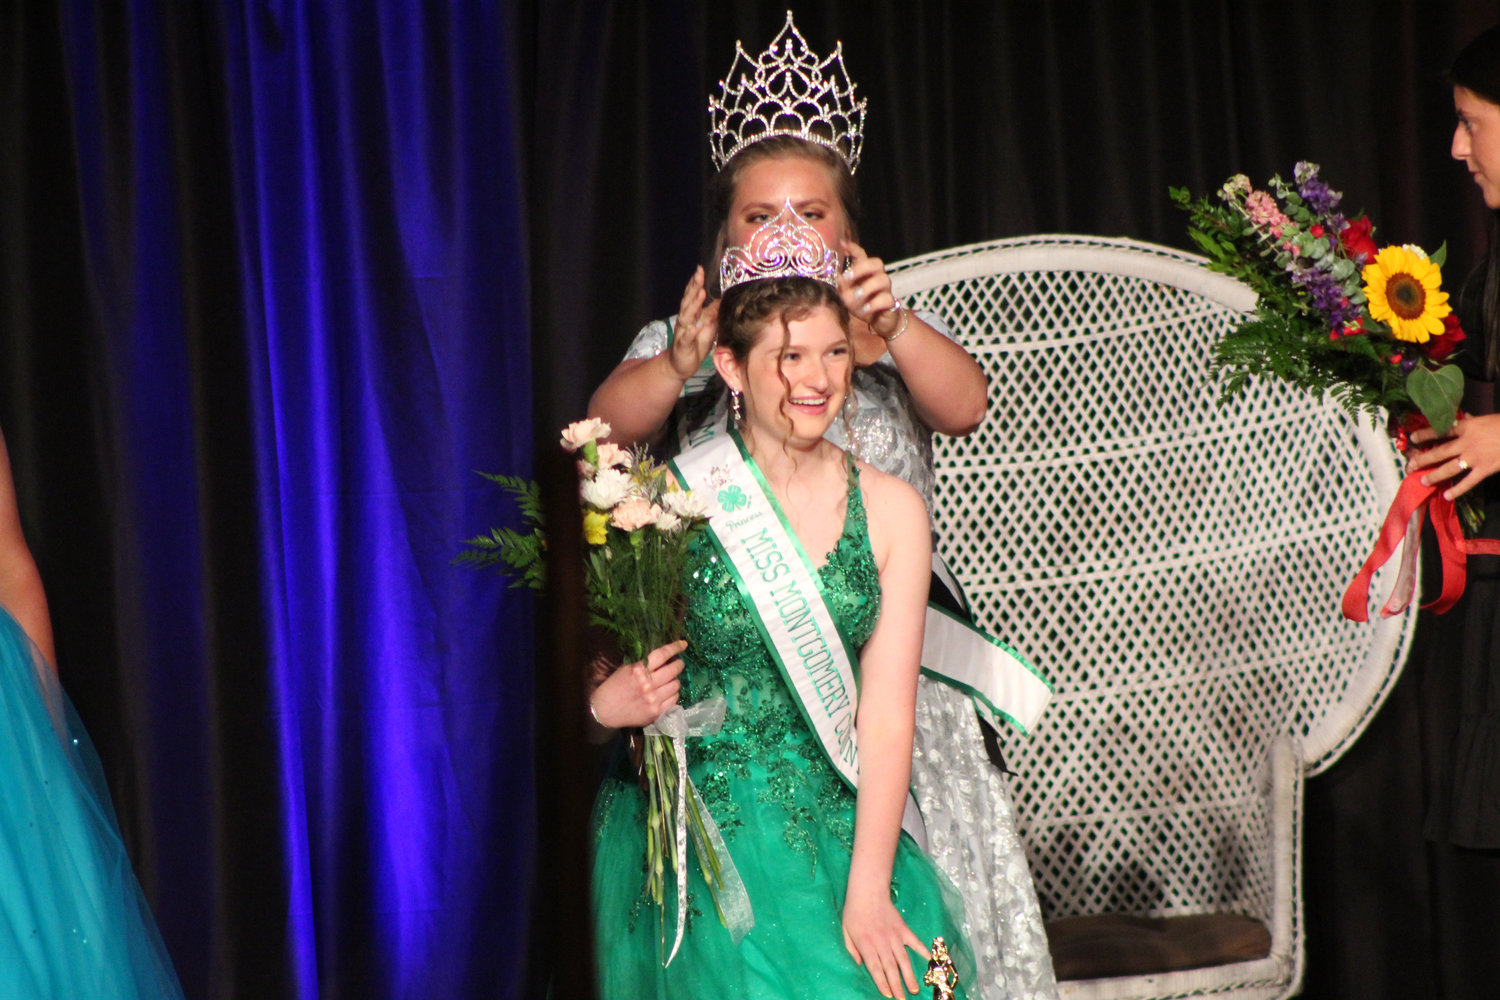 Miranda Crowe receives her Miss Princess crown from last year's Montgomery County Queen Morgan Meadows